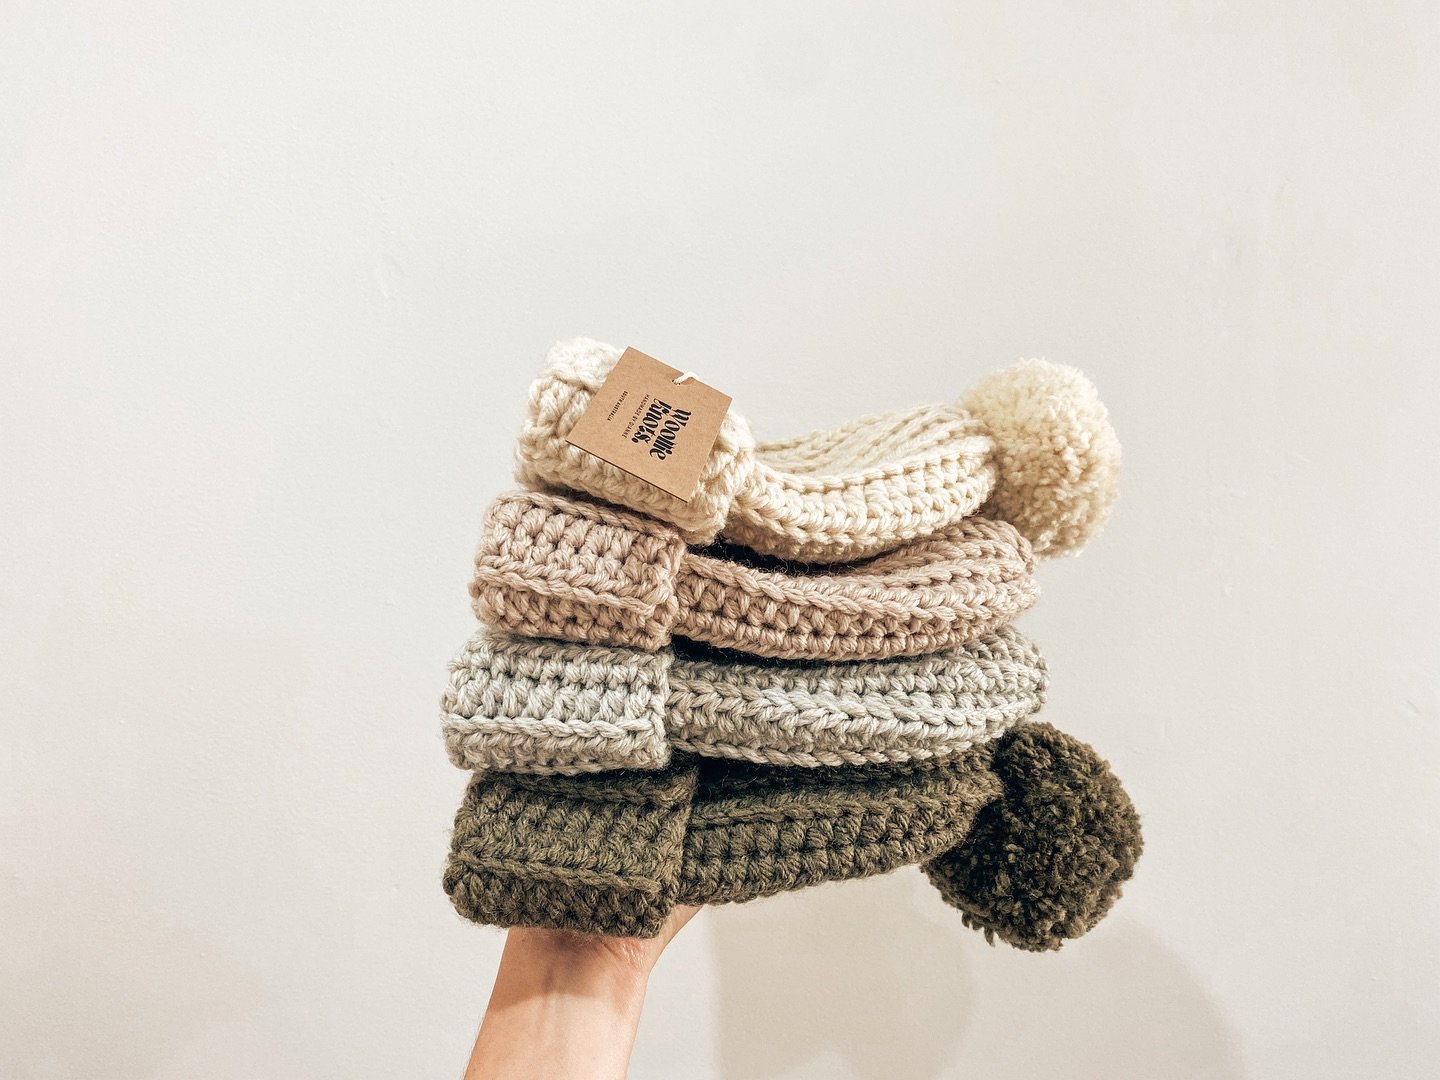 @woollie.knots is back! 💫
Quality South Australian Hand crocheted beanies - made by Dianne with a gorgeous, thick wool blend yarn.

a luxurious warm hug to get you through the woollie weather months in comfort and style with a unisex design with or 